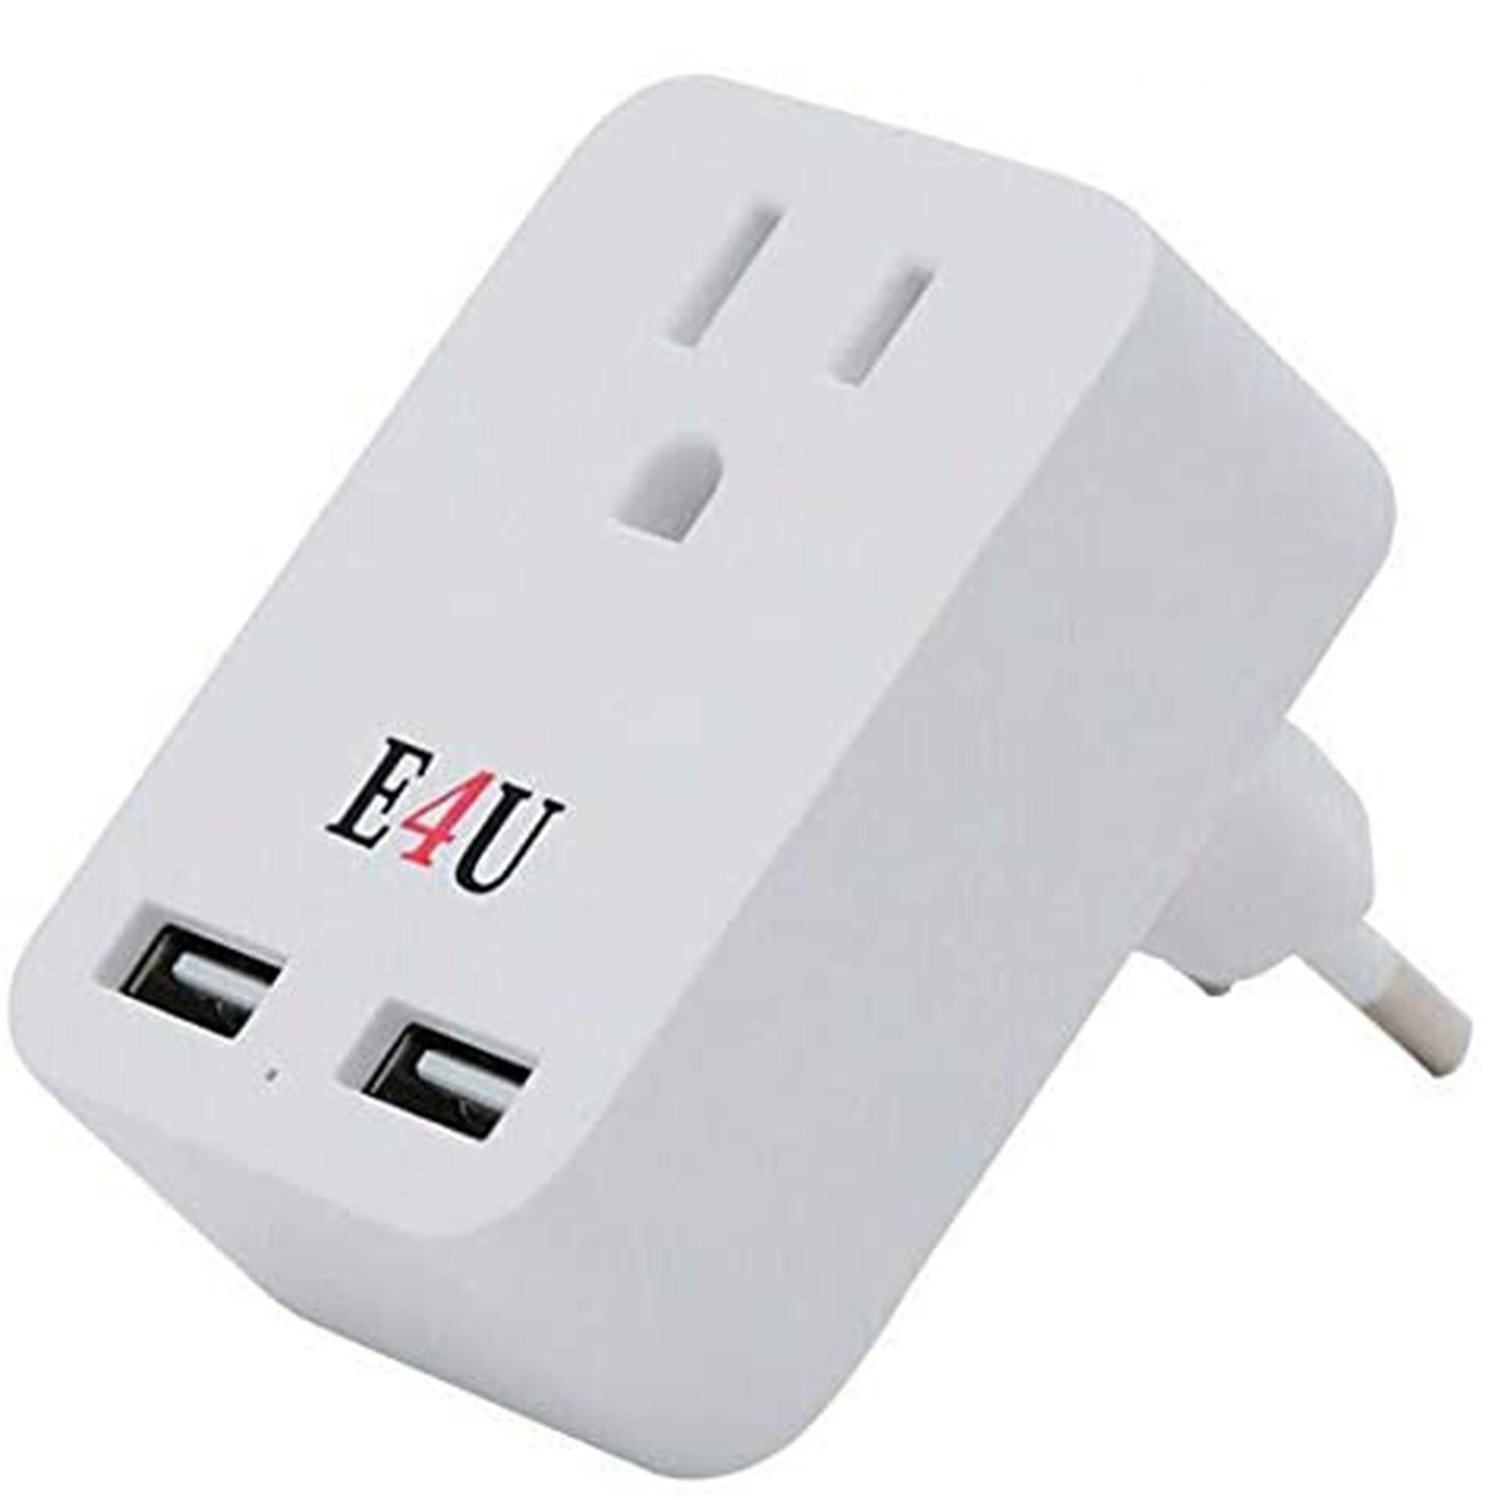 5Core In Wall 2 USB 1 Outlet Type C Adapter 2.4A USB Fast Charger ETL Approved 2U1O-C-1